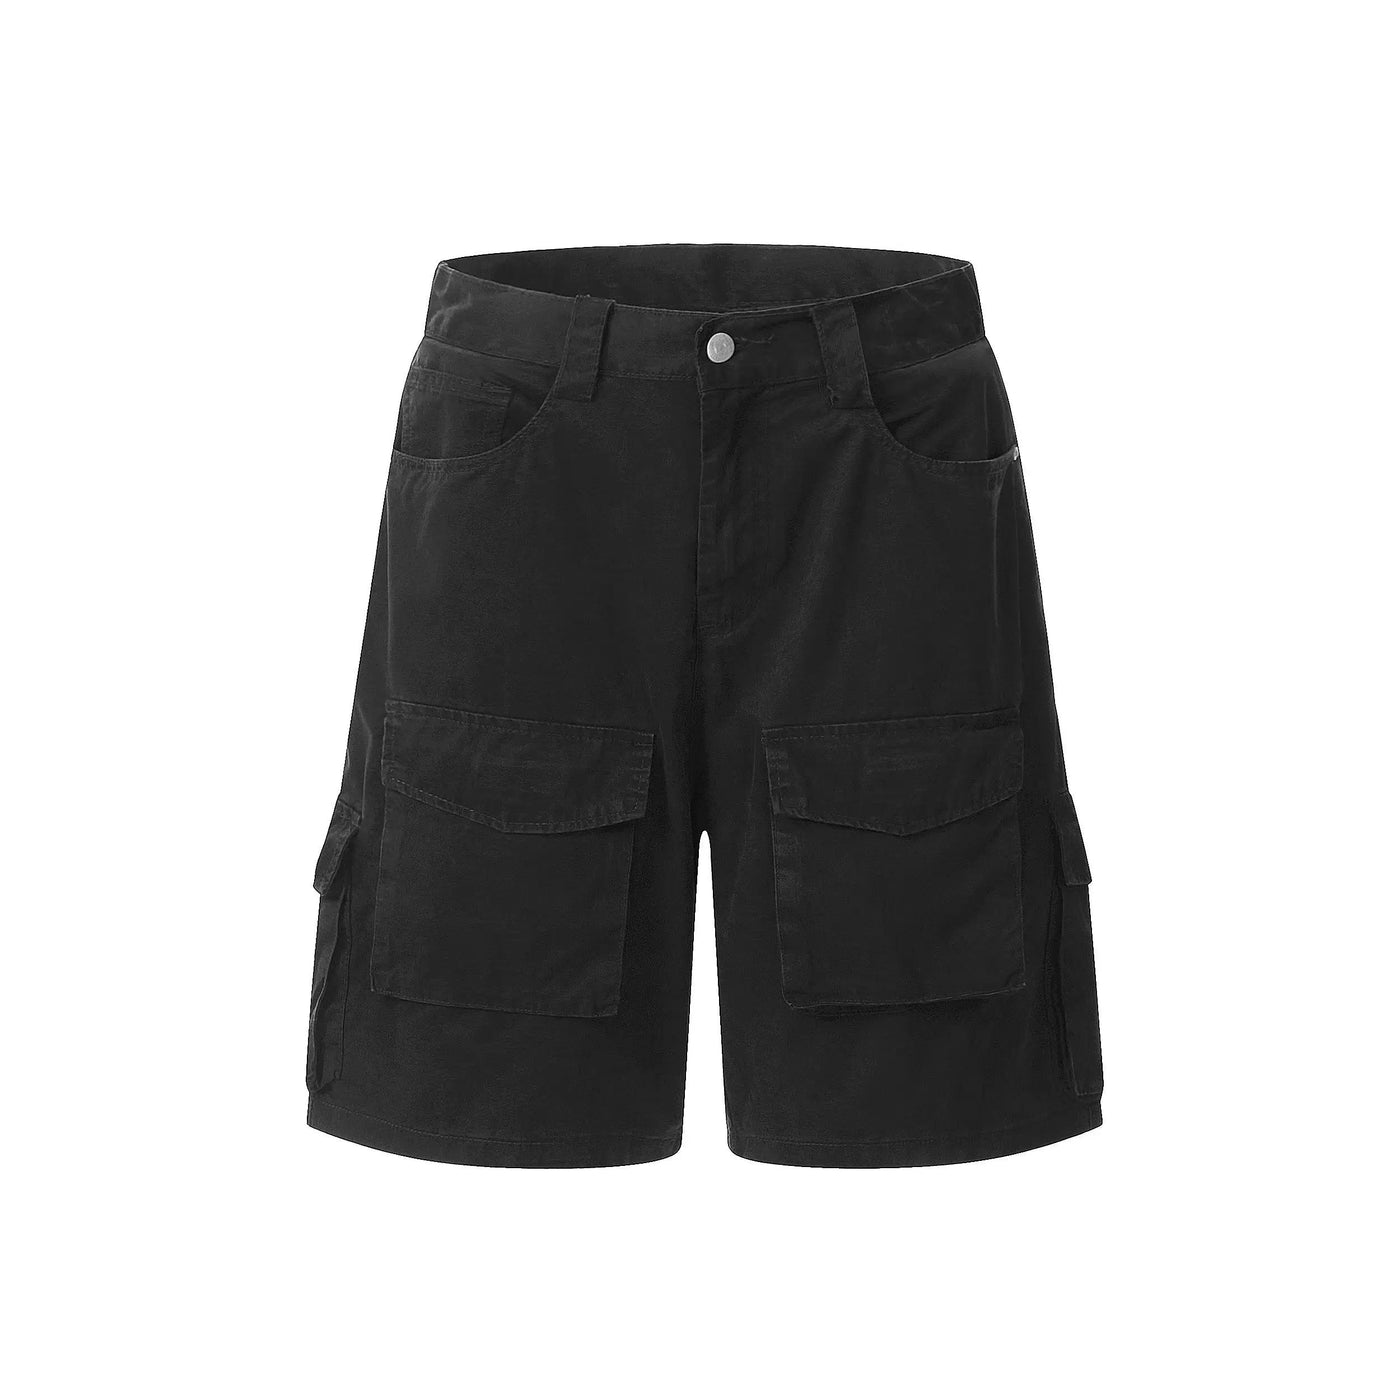 Flap Pocket Cargo Style Shorts Korean Street Fashion Shorts By Made Extreme Shop Online at OH Vault